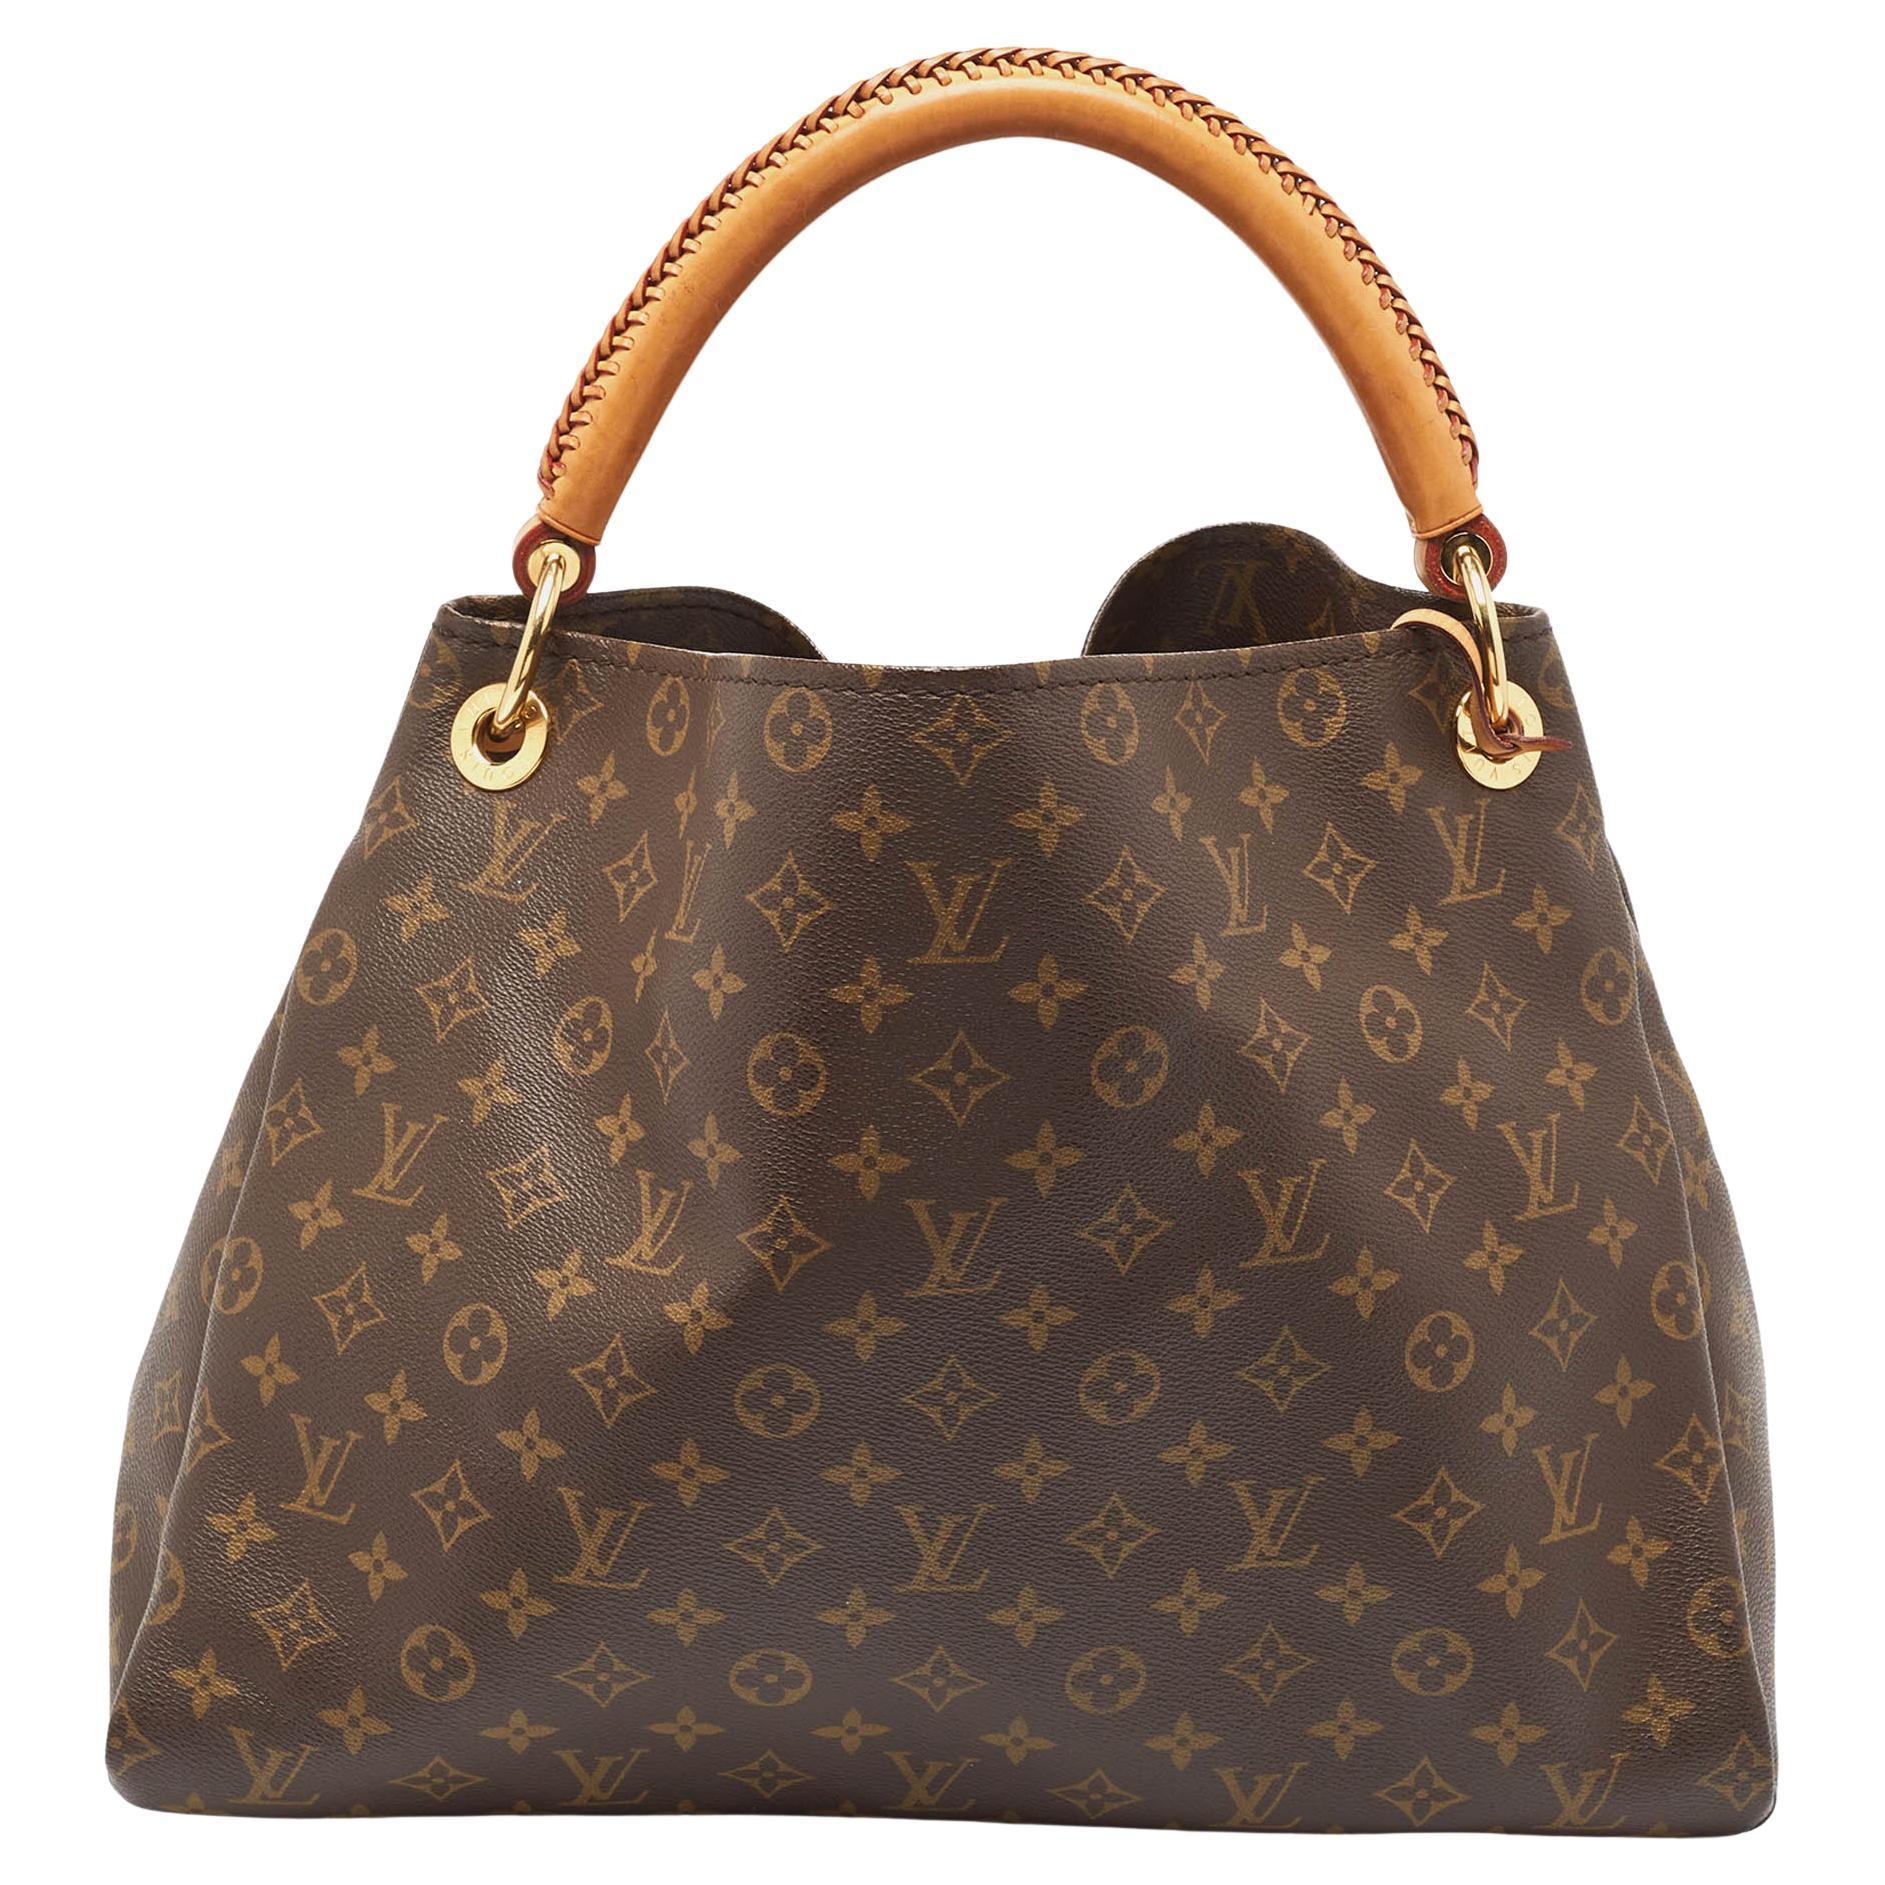 How can you tell if a Louis Vuitton Artsy bag is real?